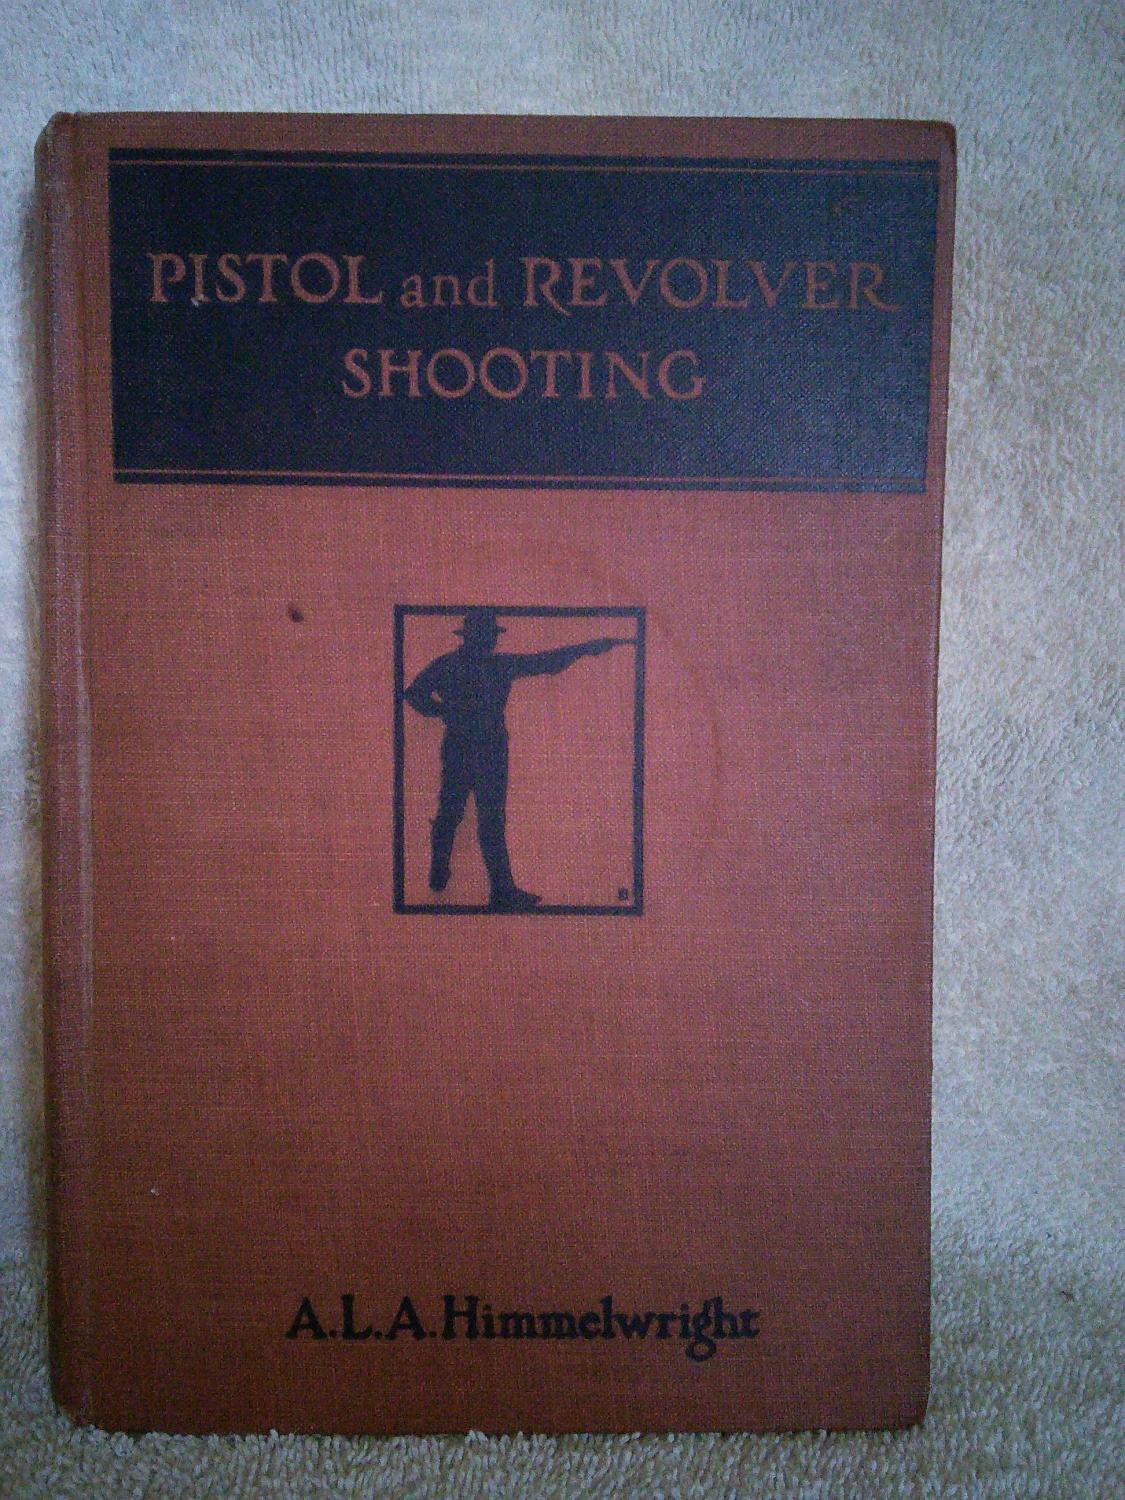 Pistol and Revolver Shooting by A. L. A. Himmelwright: Very Good ...